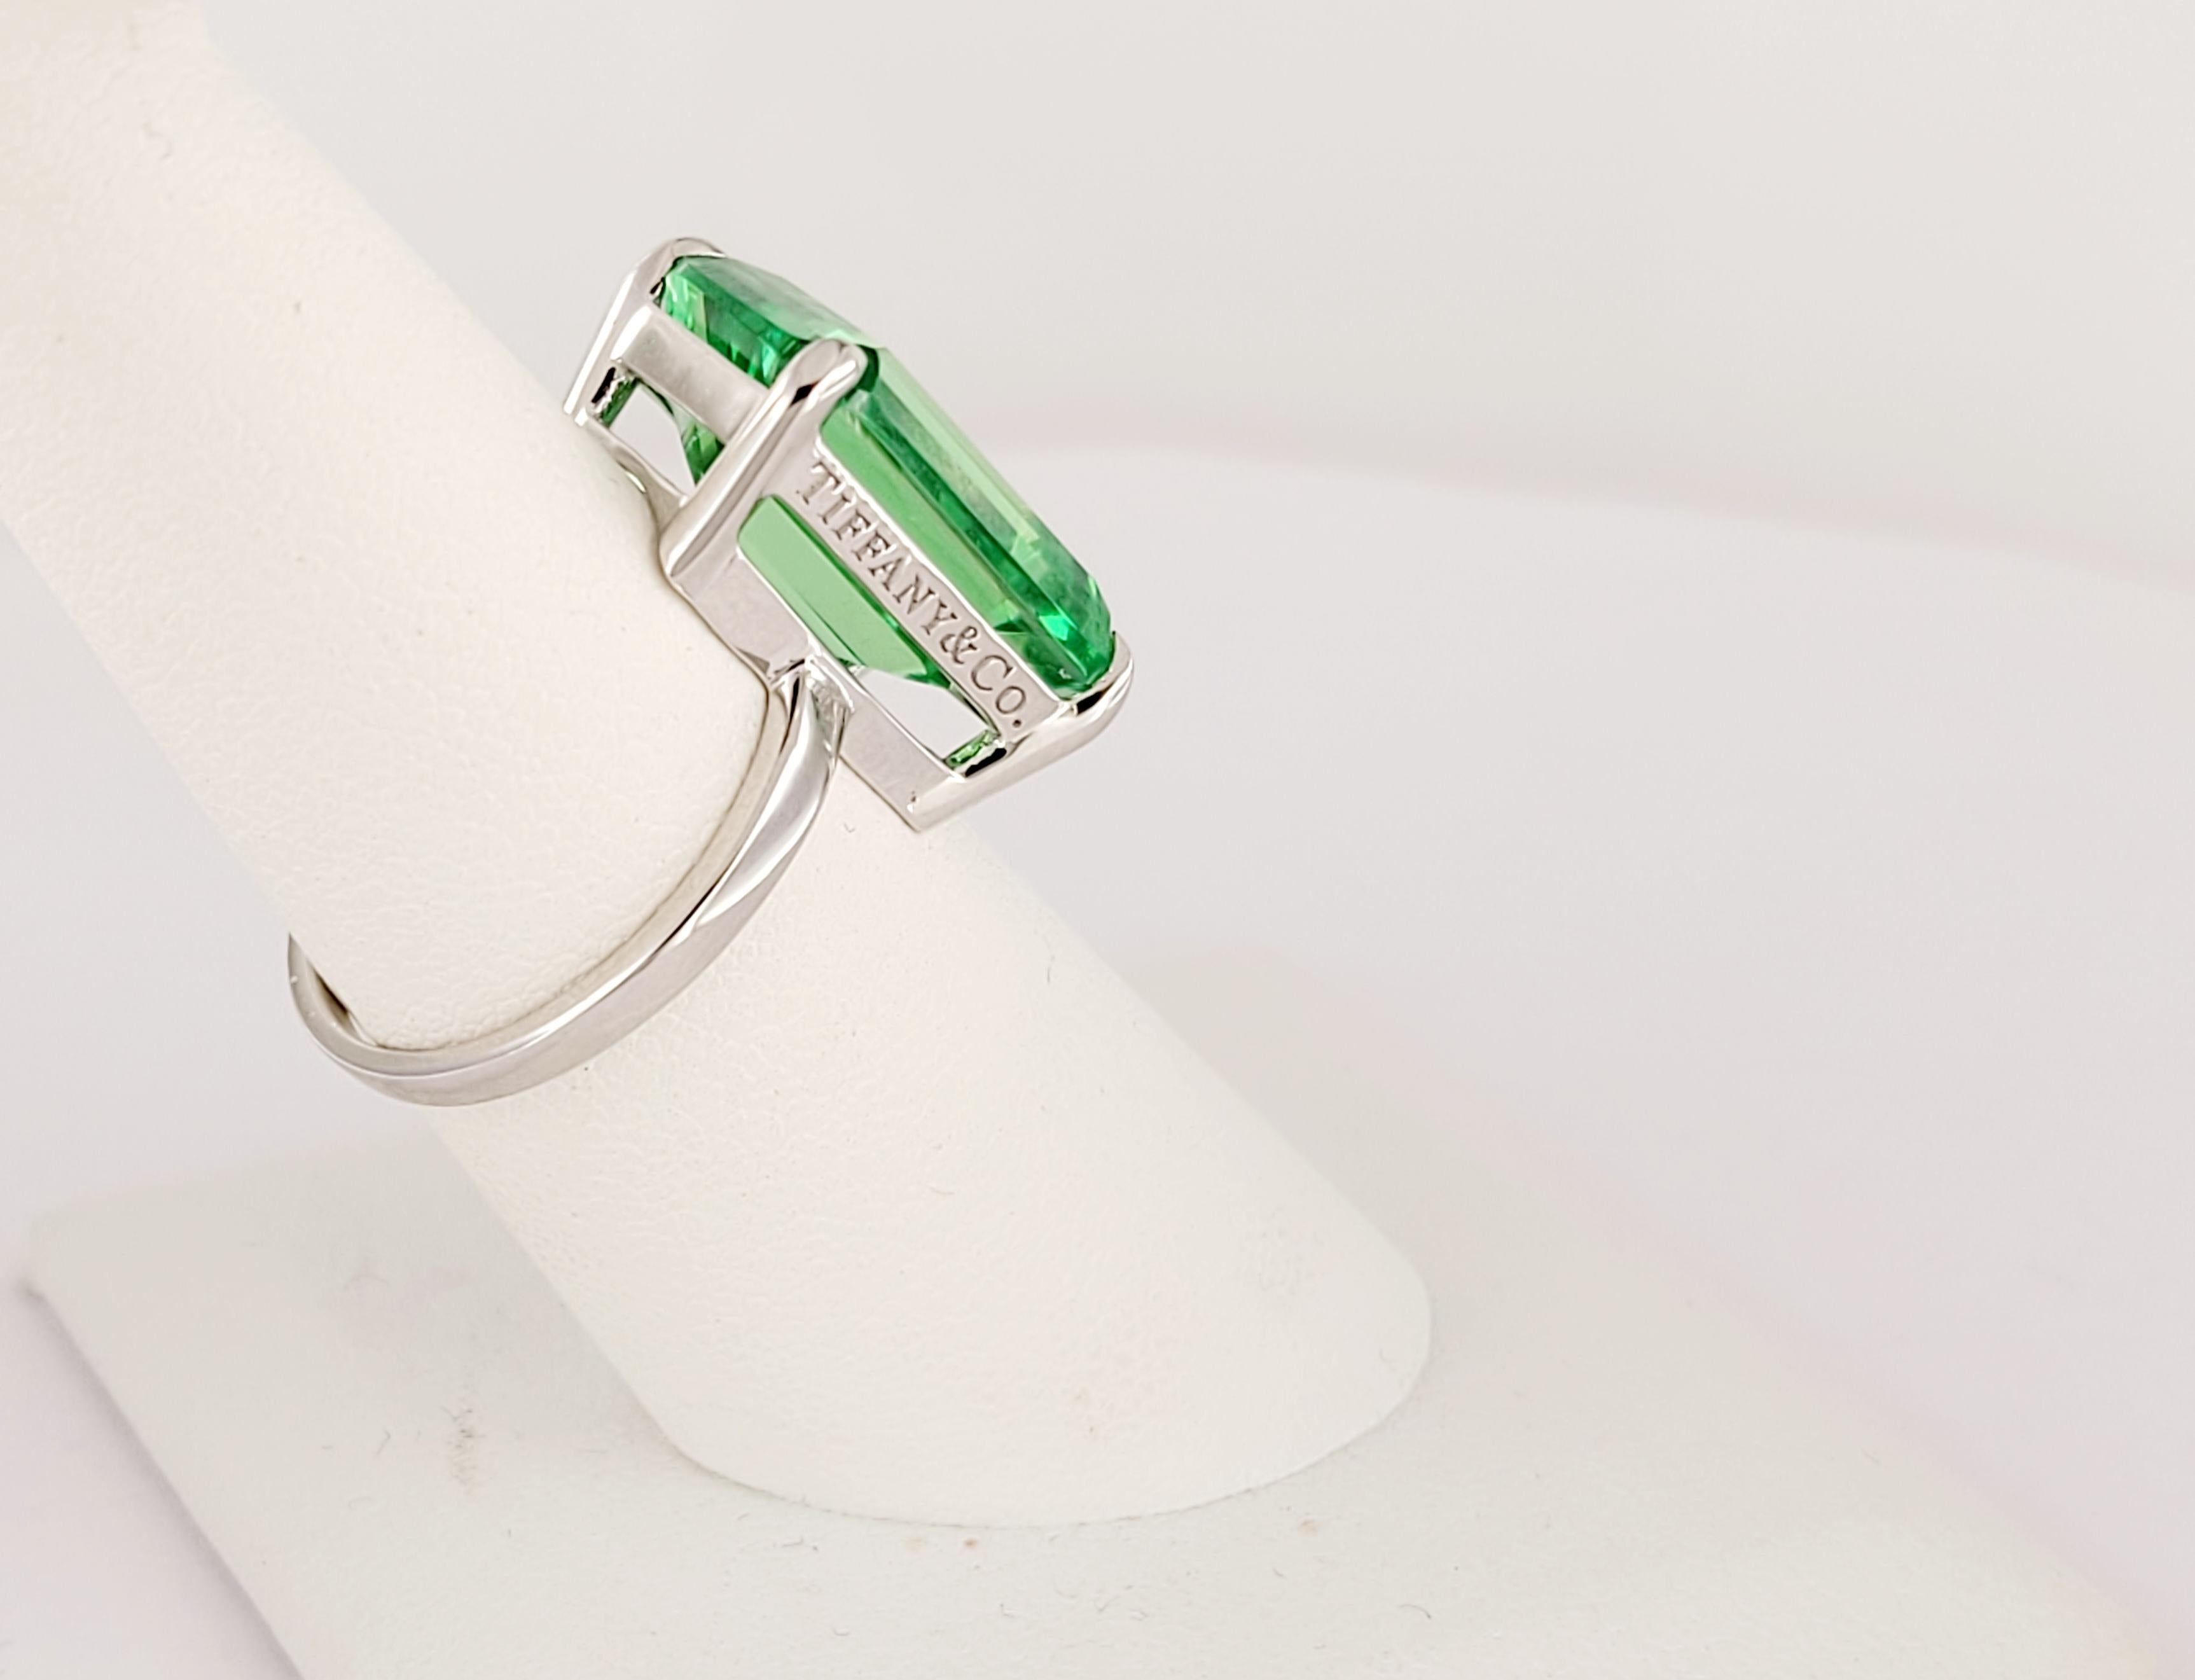 Tiffany & Co Green Quartz  Ring 

Material Sterling Silver 

Style Cocktail 

Quartz color Green

Quartz Dimension is 16 x 12 mm

Ring Size 7

Ring Weight 4.6 gr

Hallmarks: Tiffany & Co AG925

Condition New, never worn 

Tiffany & Co Ring Pouch is